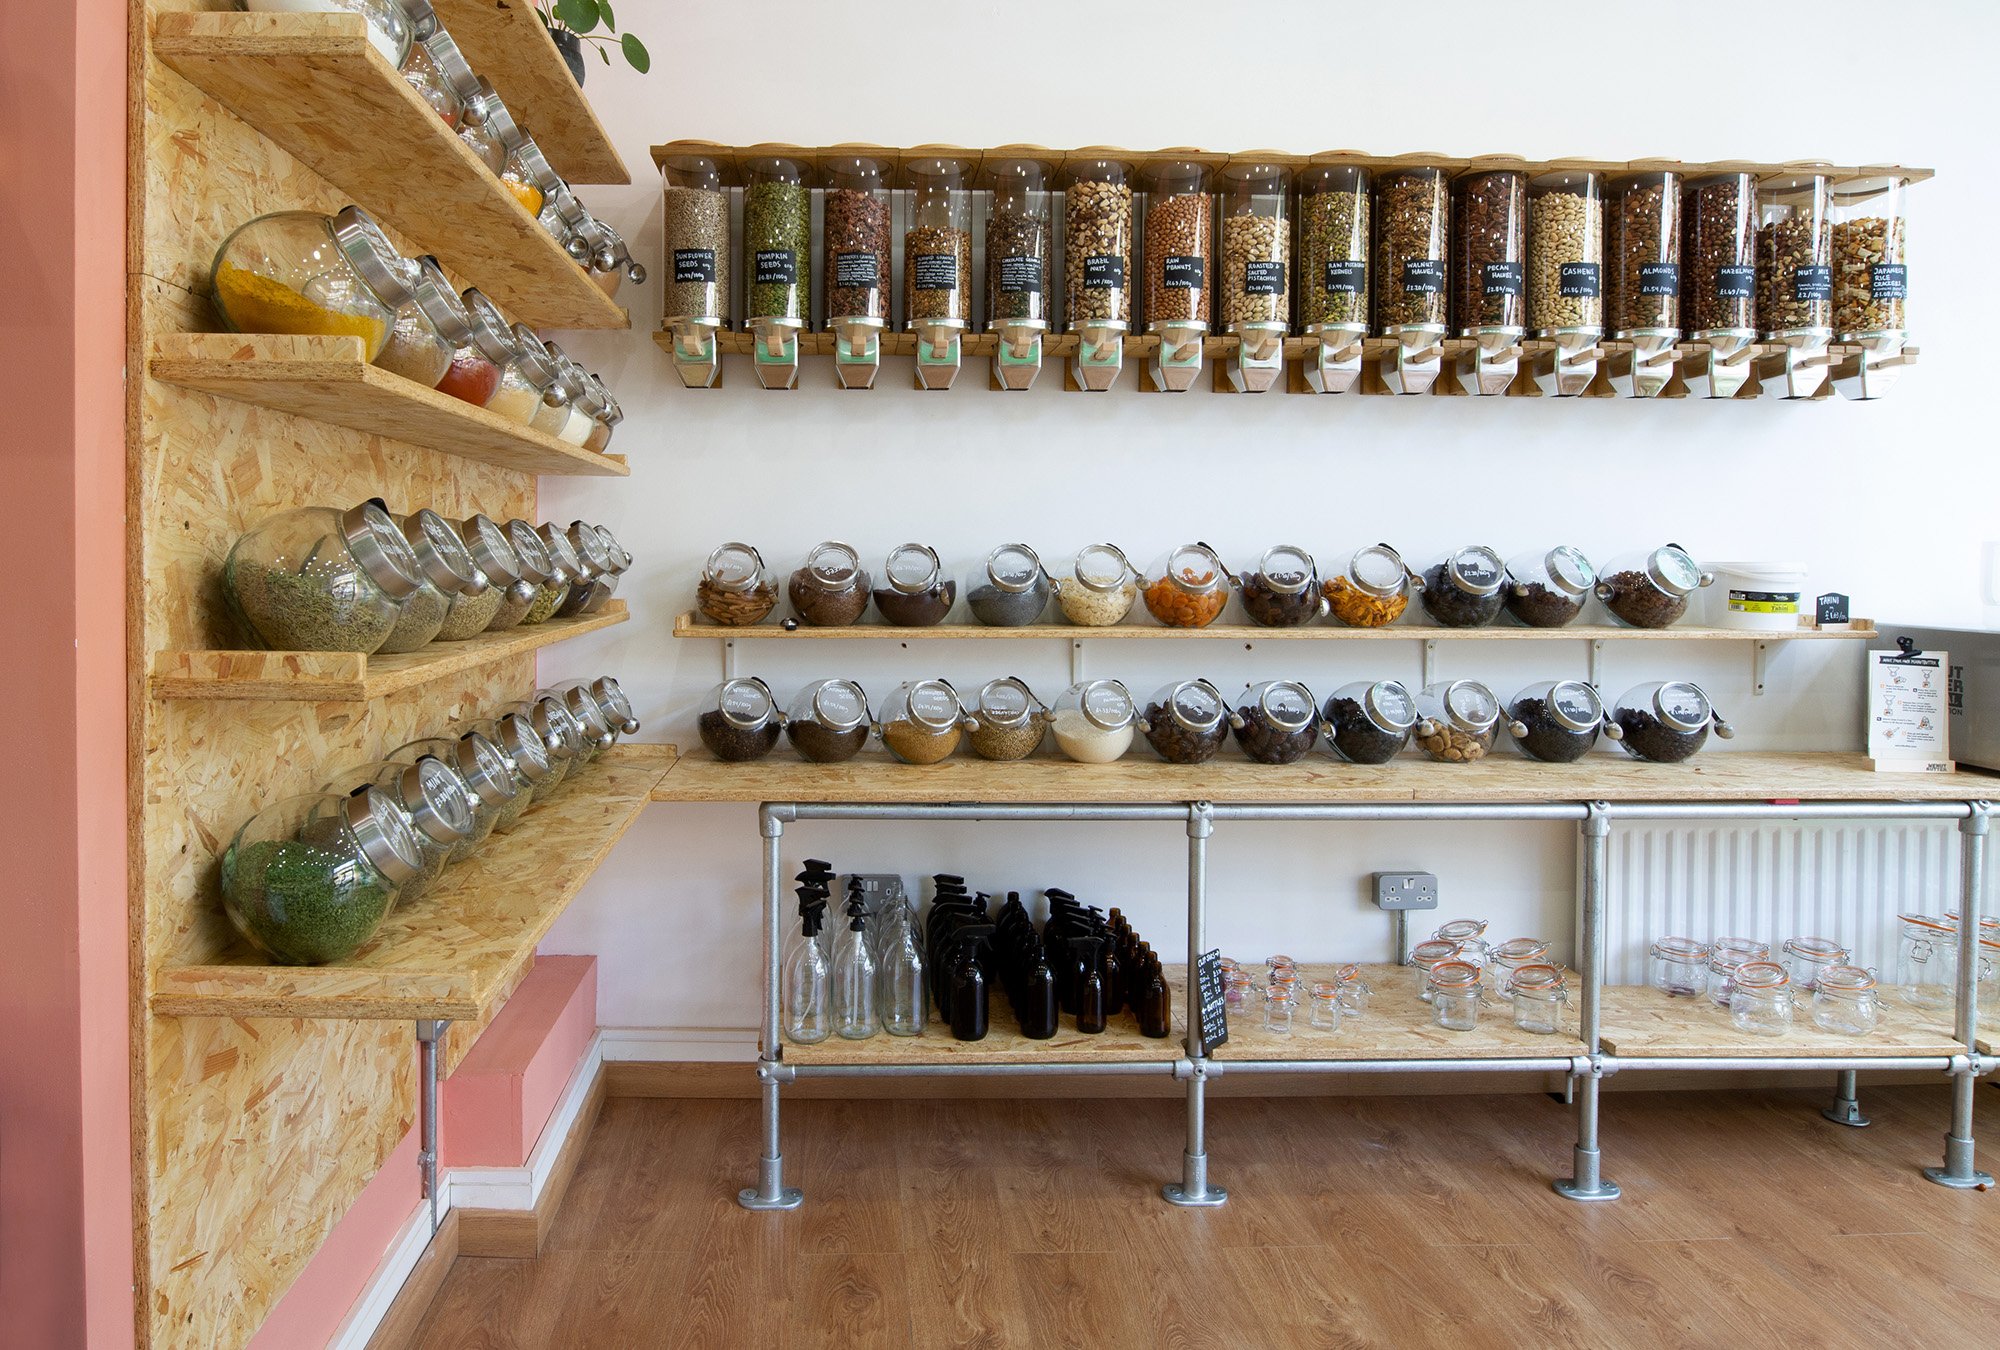 food jars and dispensers inside Jarr Market, a refill store in London